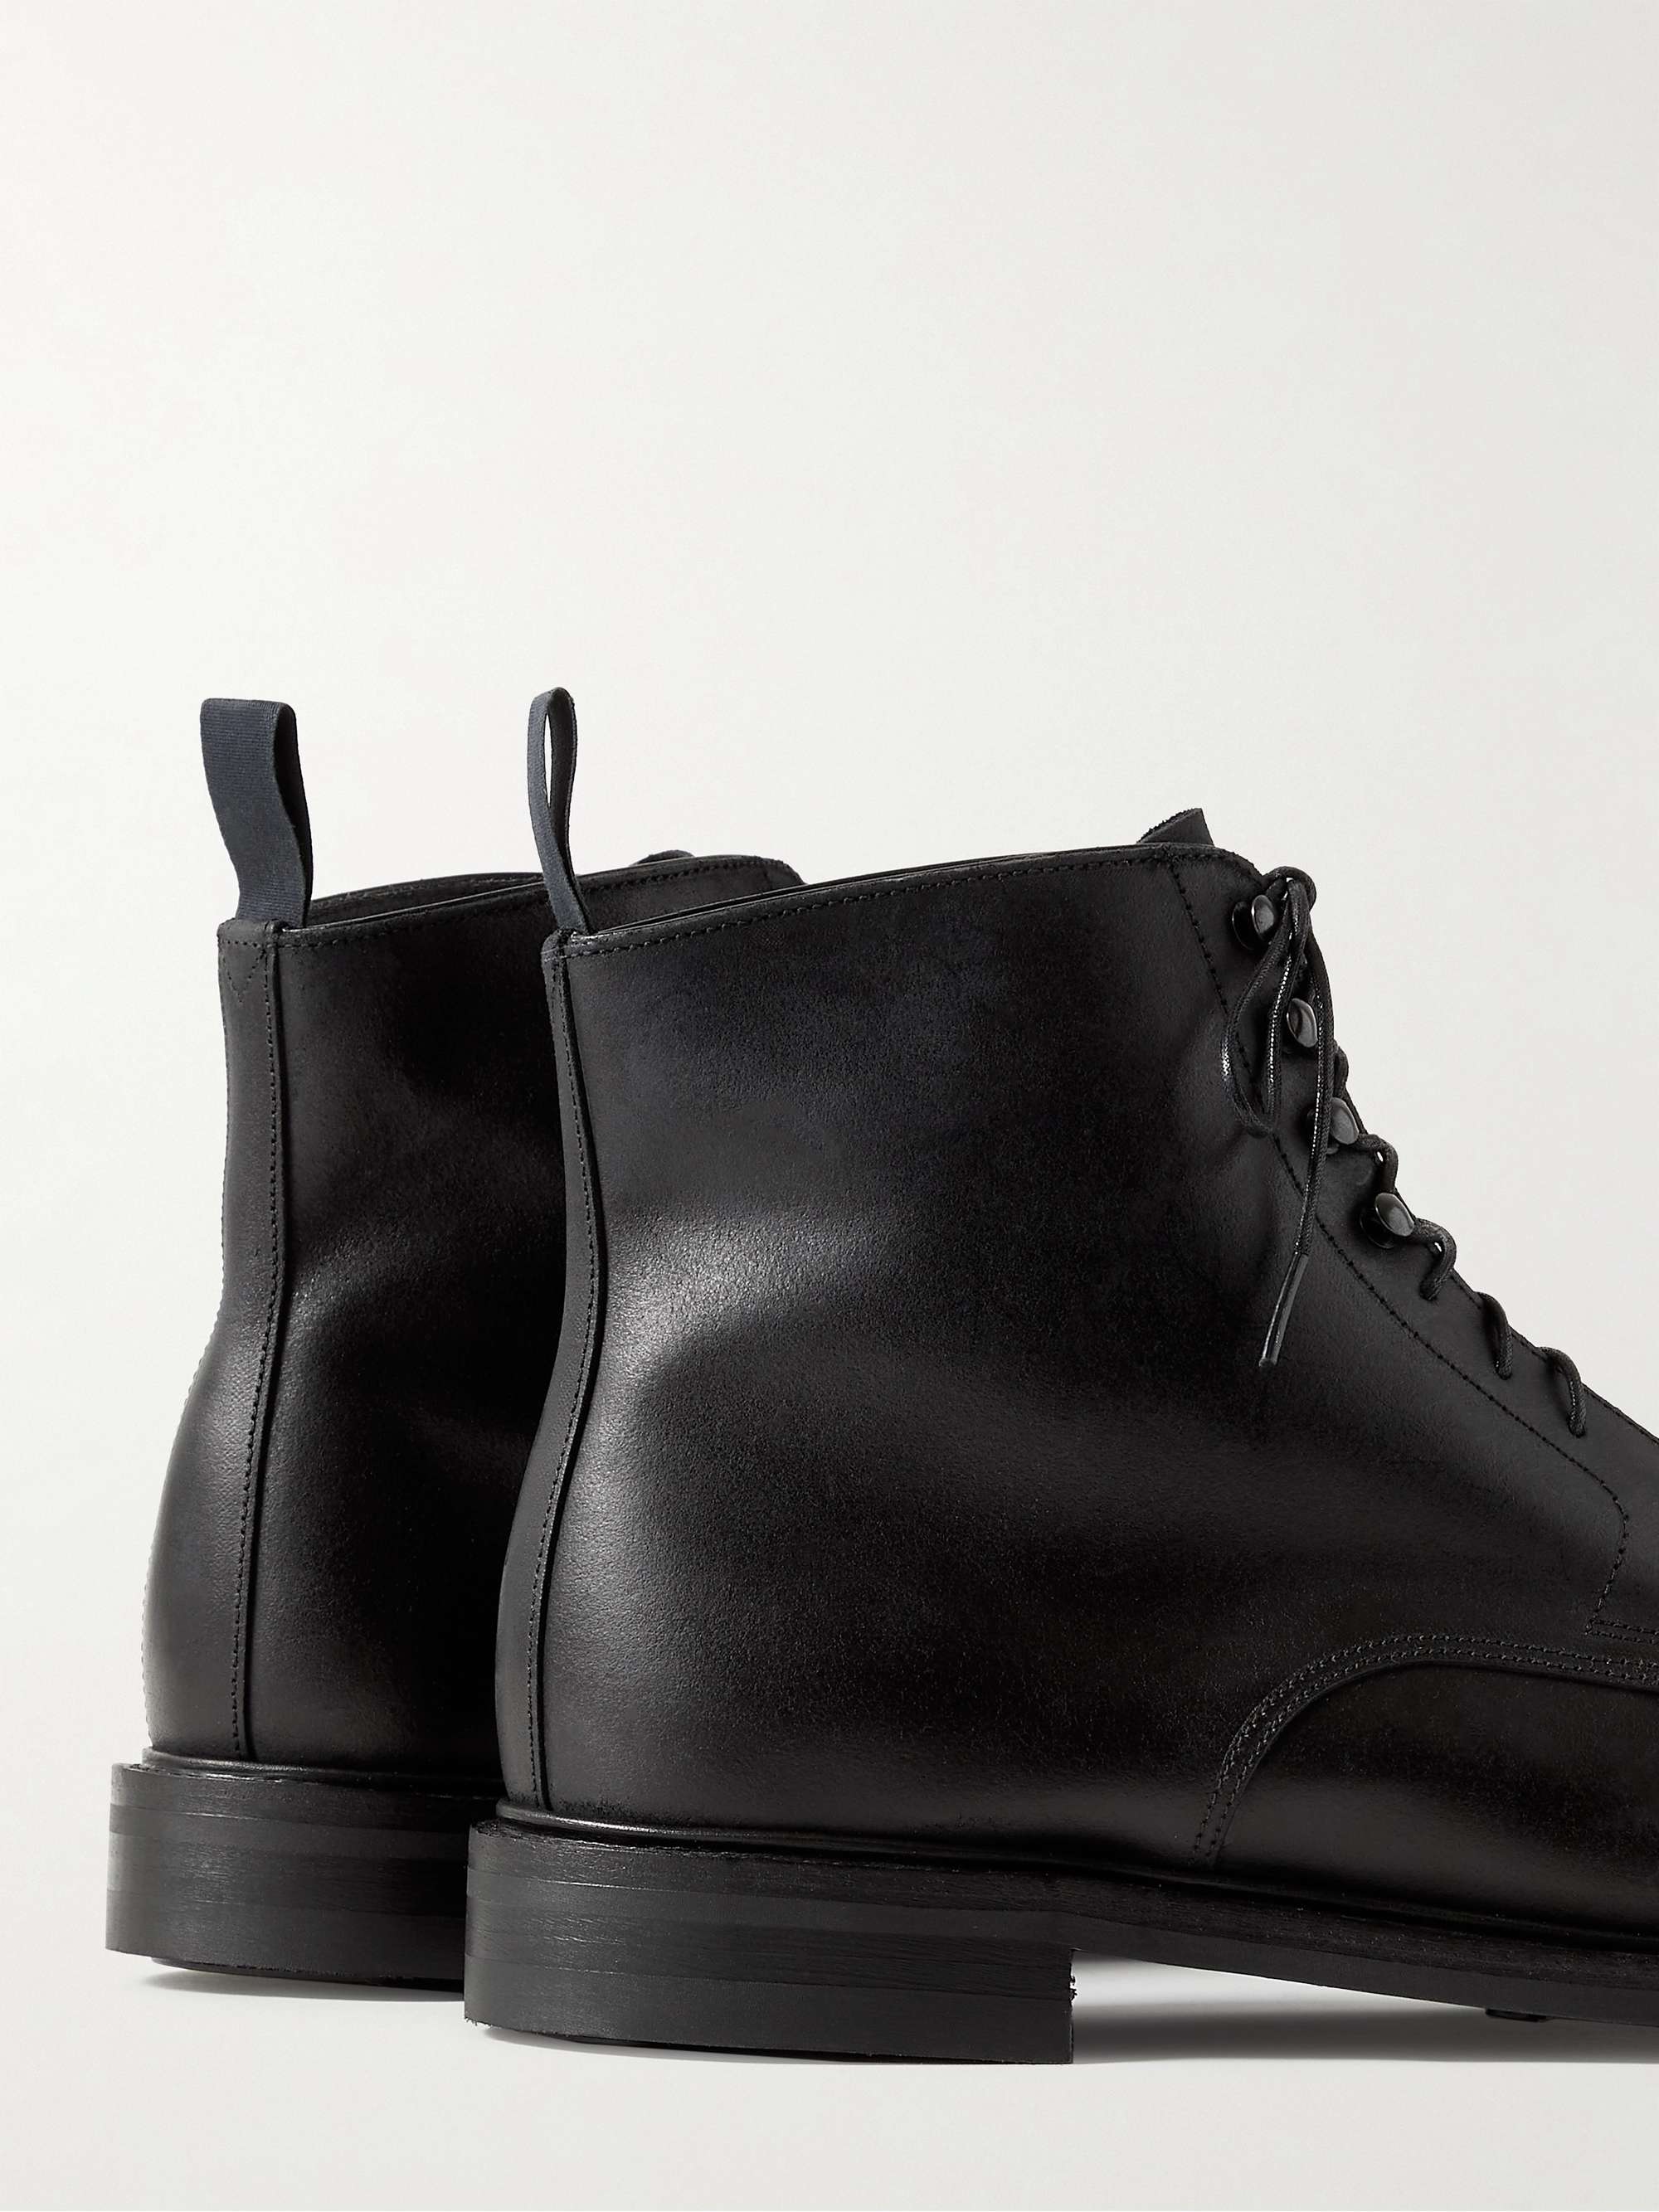 GEORGE CLEVERLEY Taron 2 Leather Boots | MR PORTER